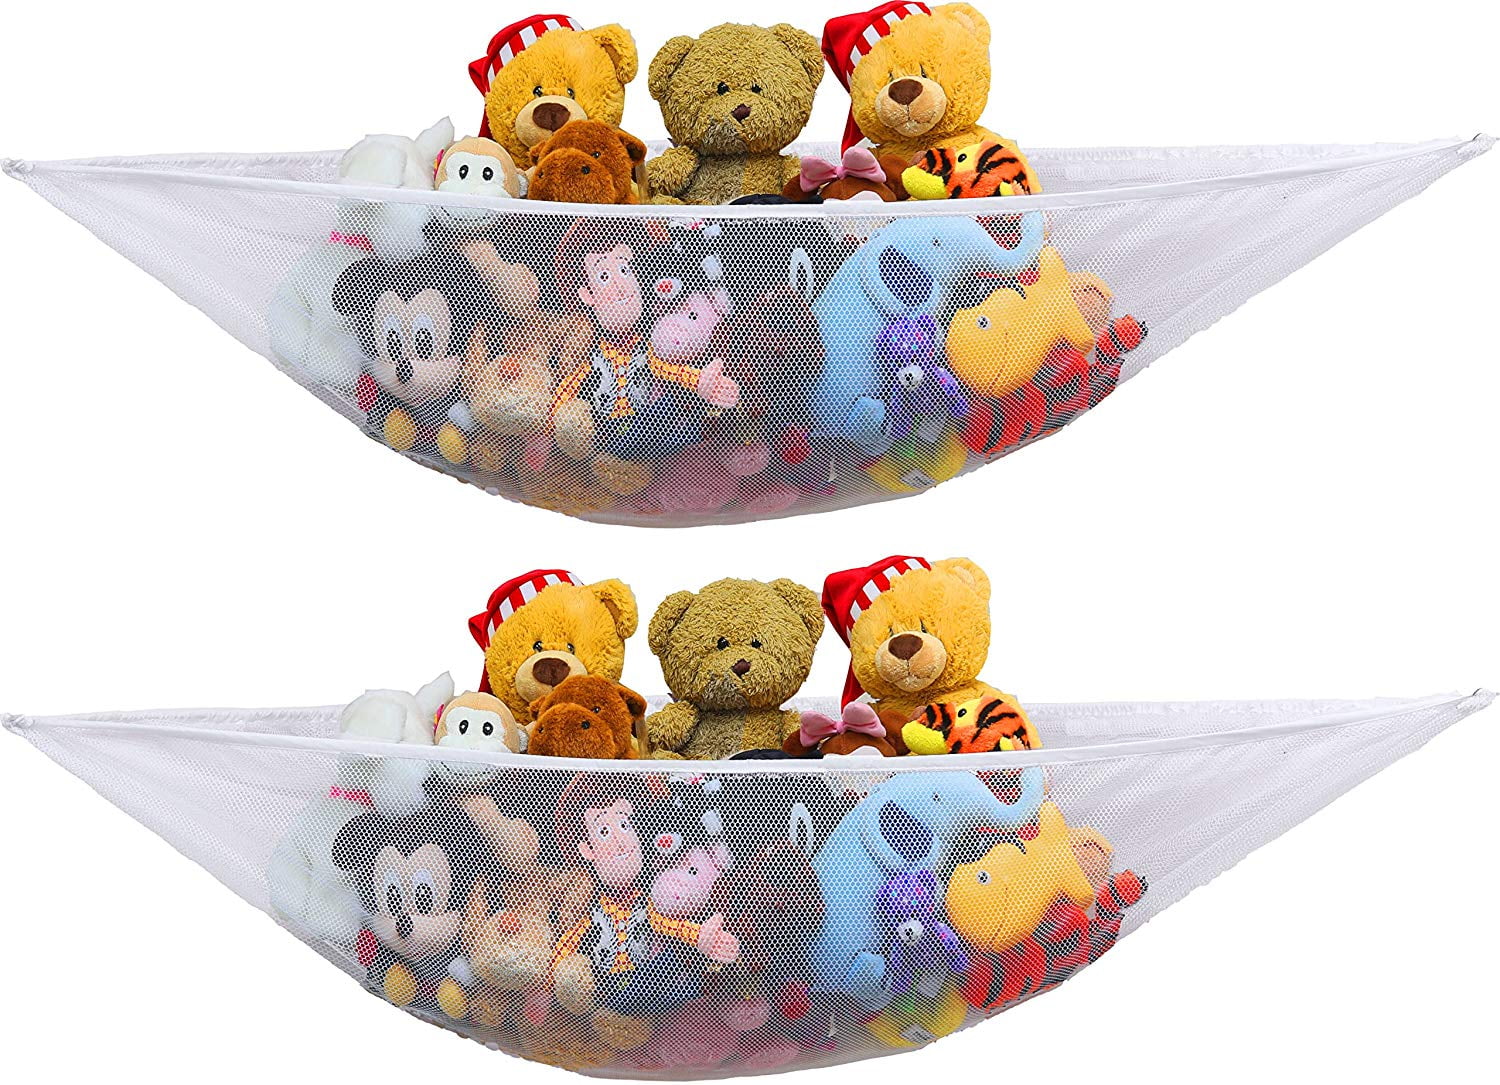 2PACK- Organize stuffed animals or children&amp;#39;s toys with this mesh hammock. Looks great with any d&eacute;cor while neatly organizing kid&rsquo;s toys and stuffed animals